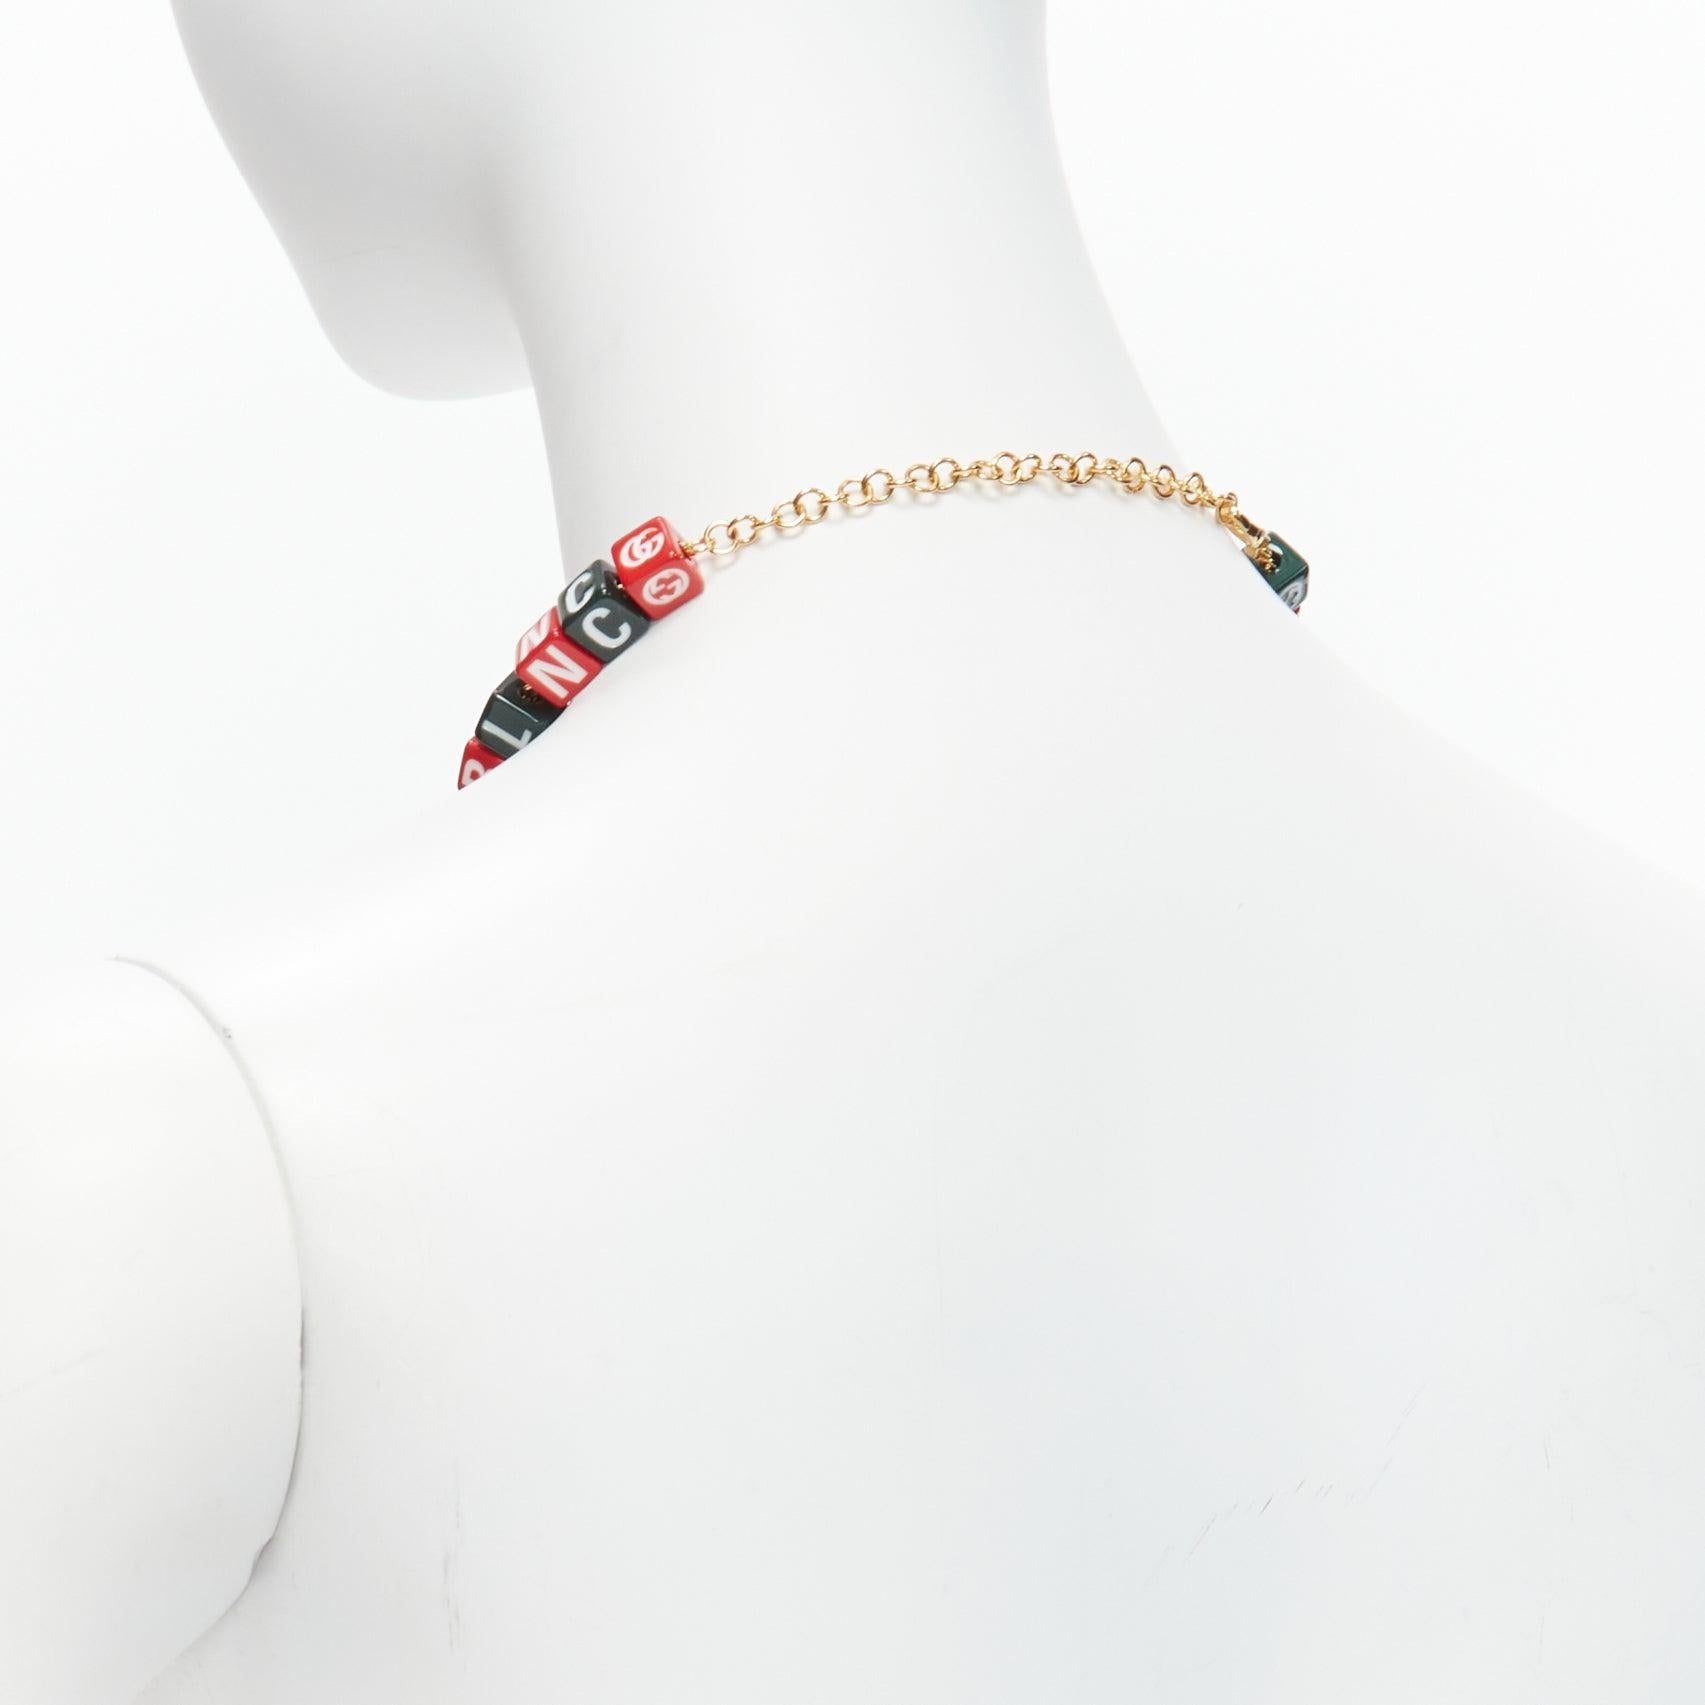 new GUCCI BALENCIAGA 2021 Hacker Project Symbols red green cubes short necklace In New Condition For Sale In Hong Kong, NT